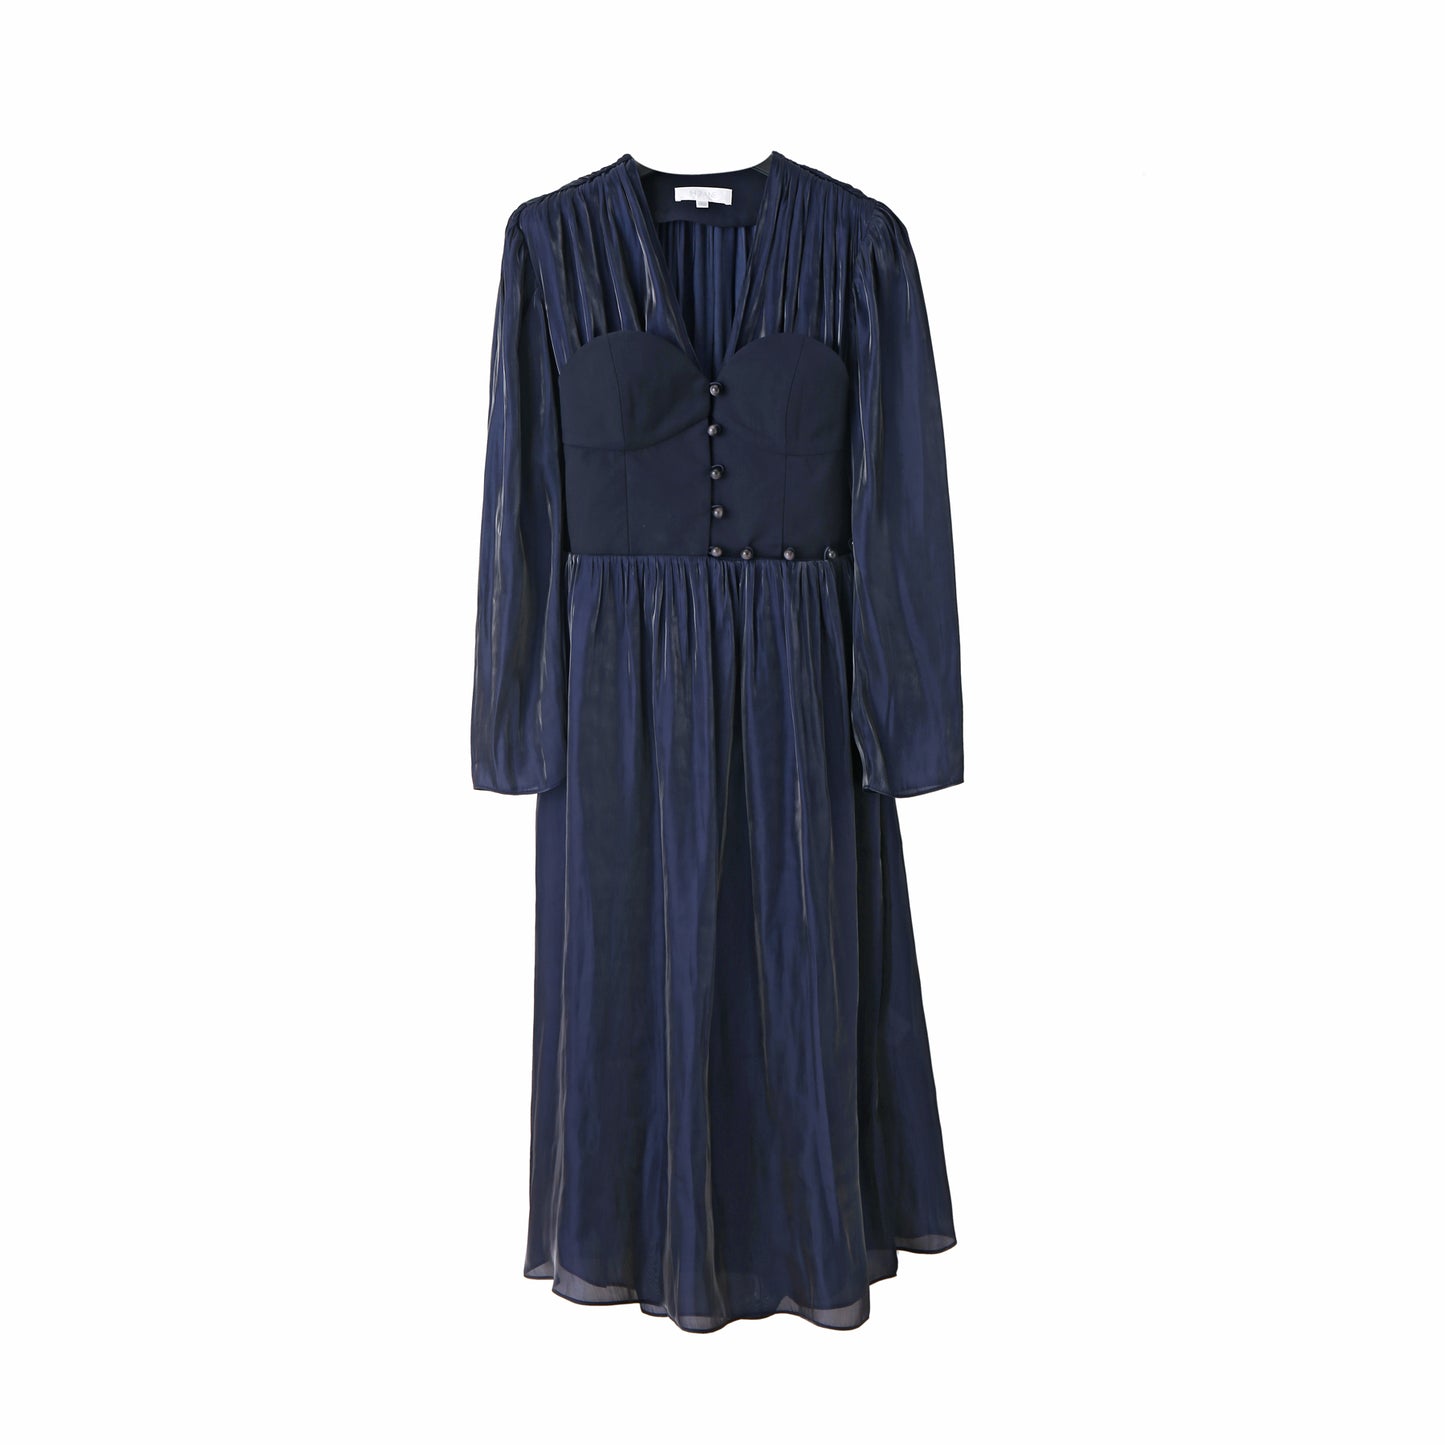 Winifred Corset Dress in Navy